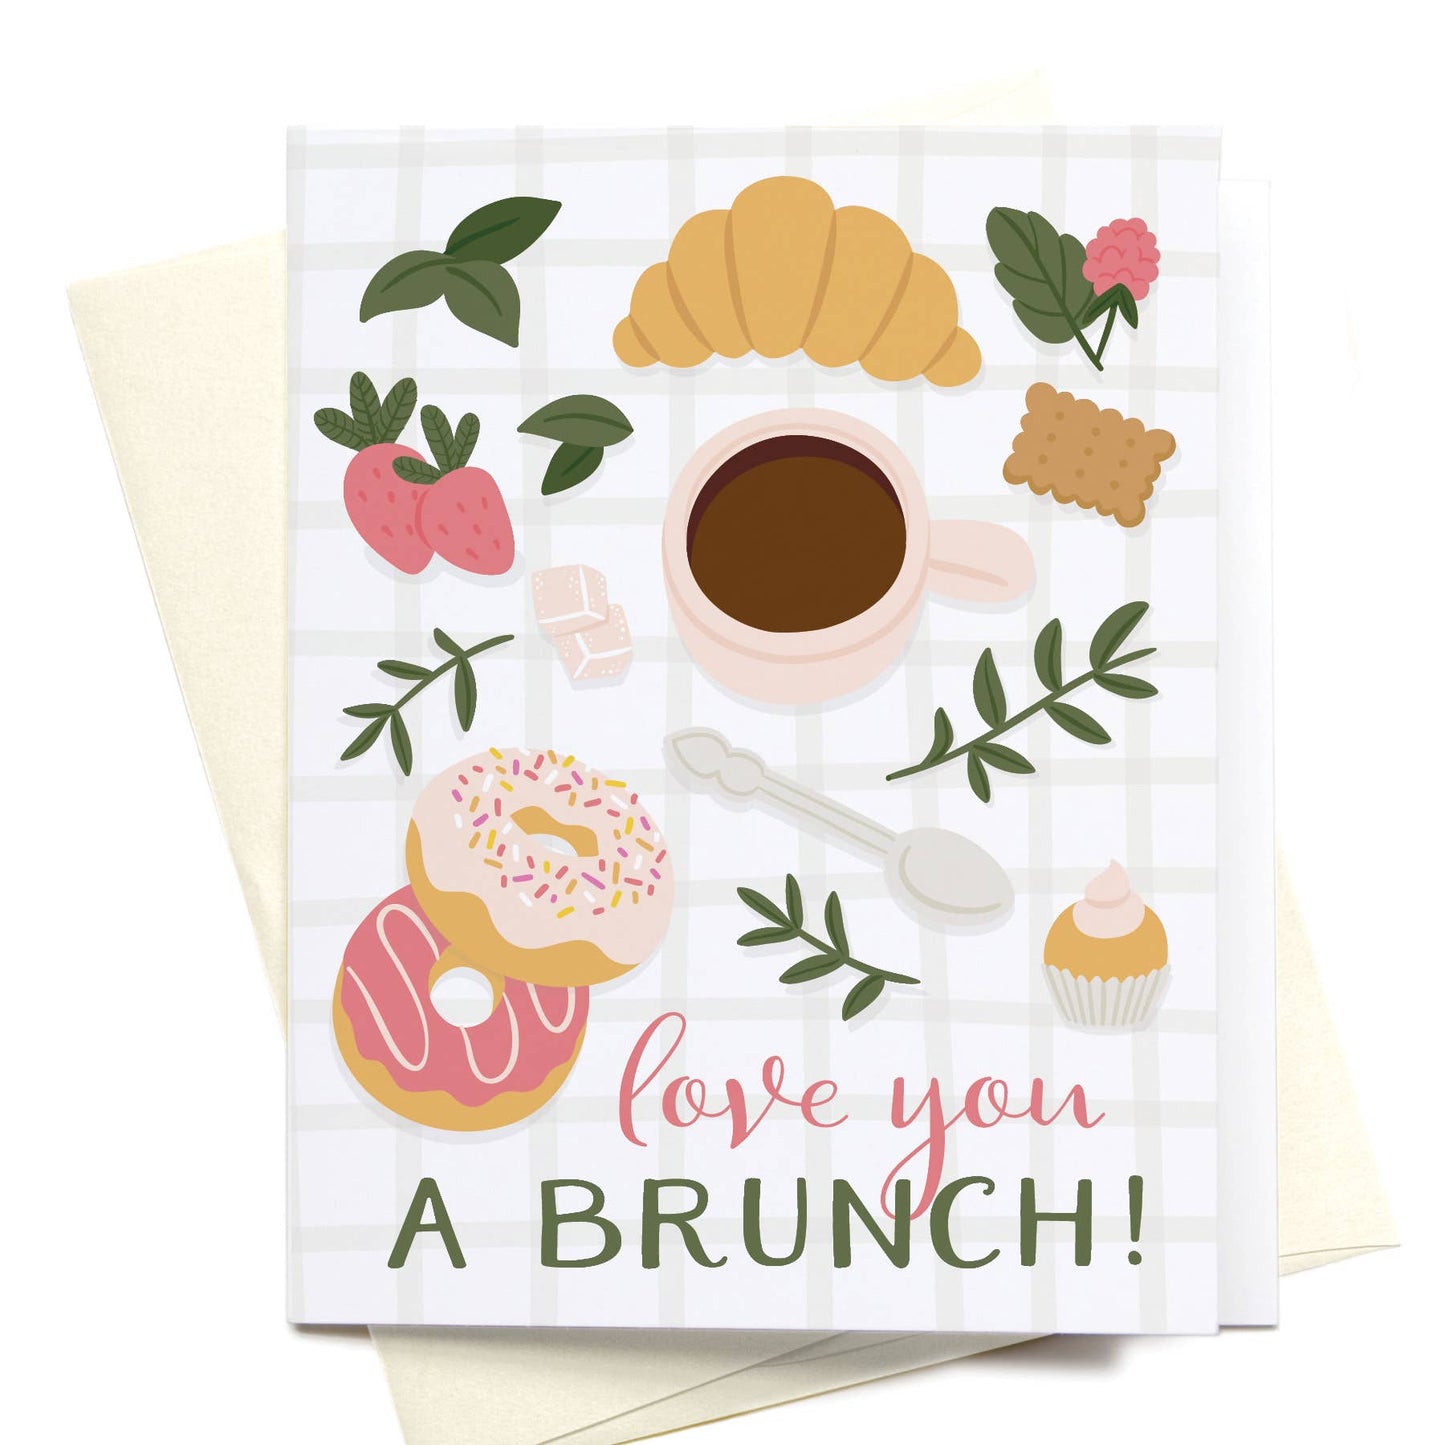 "Love You A Brunch!" Greeting Card